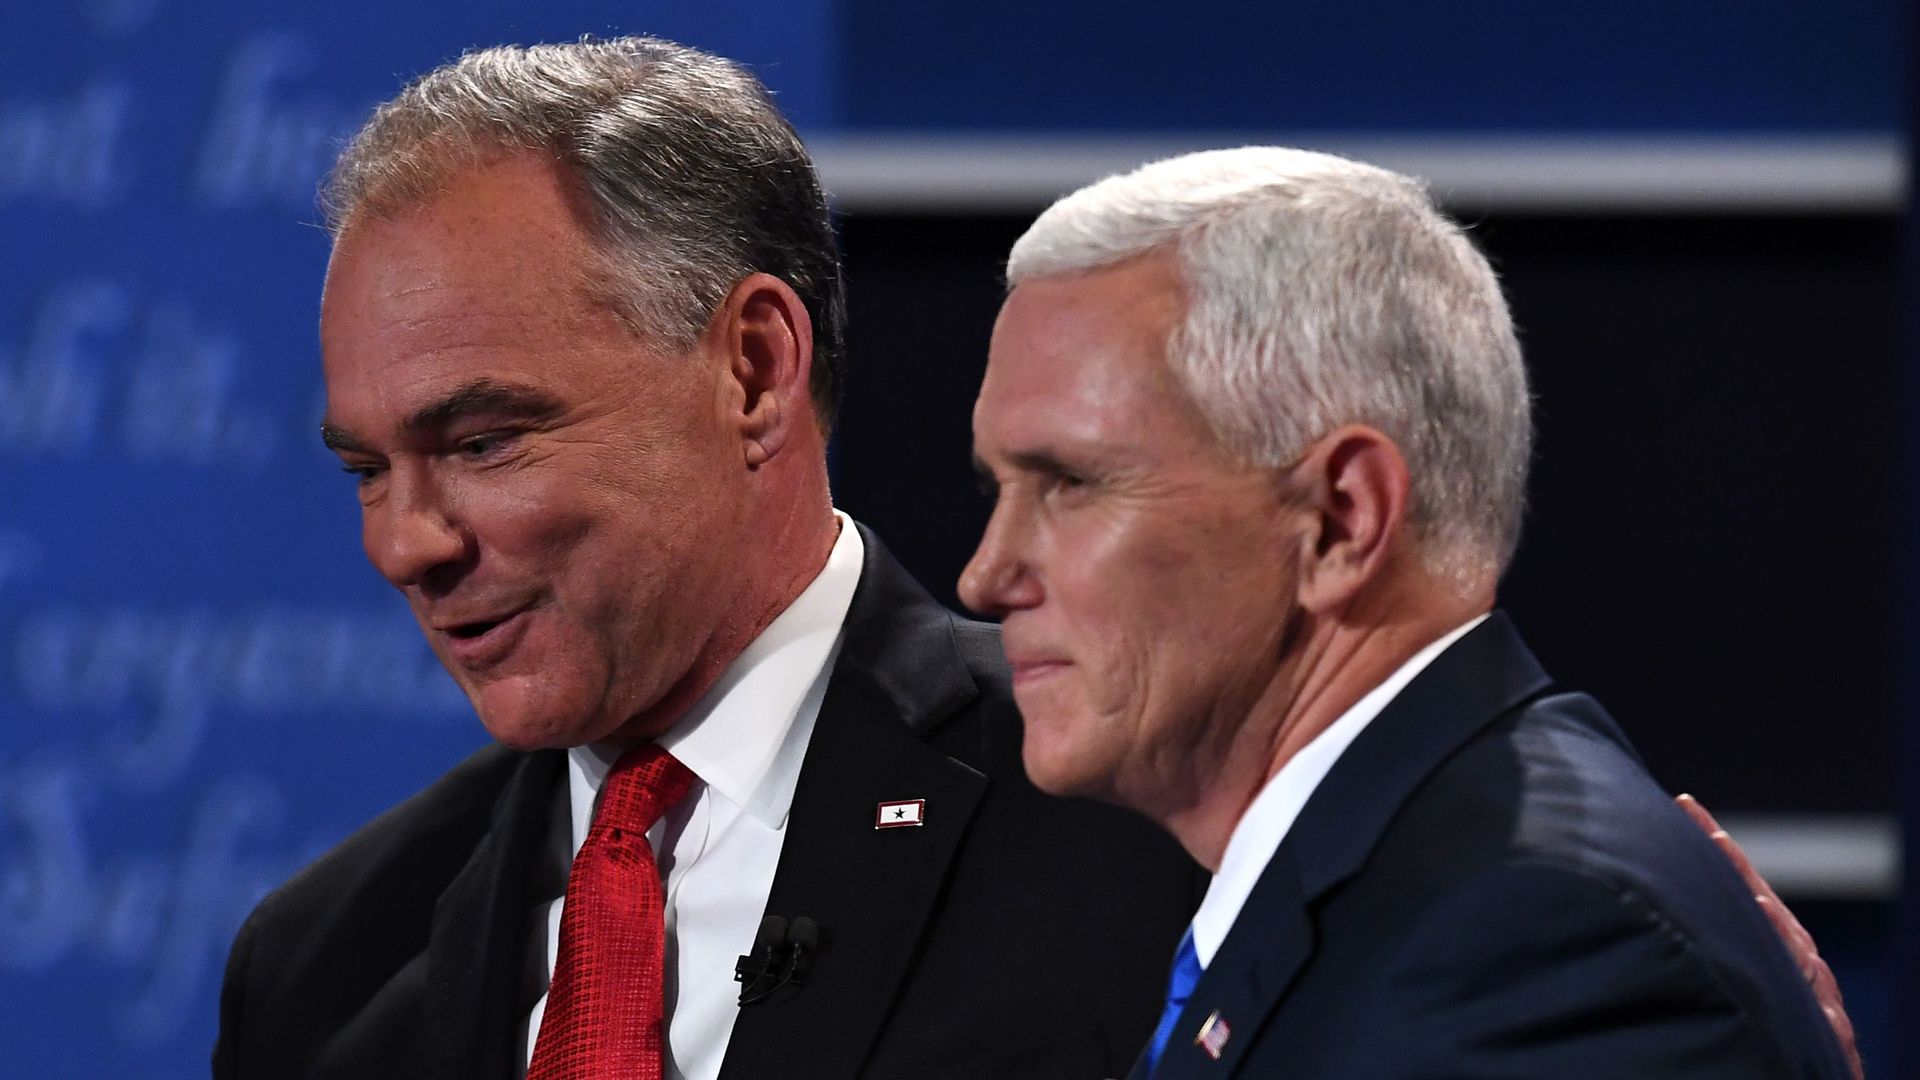 Vice president candidates Tim Kaine and Mike Pence in 2016.